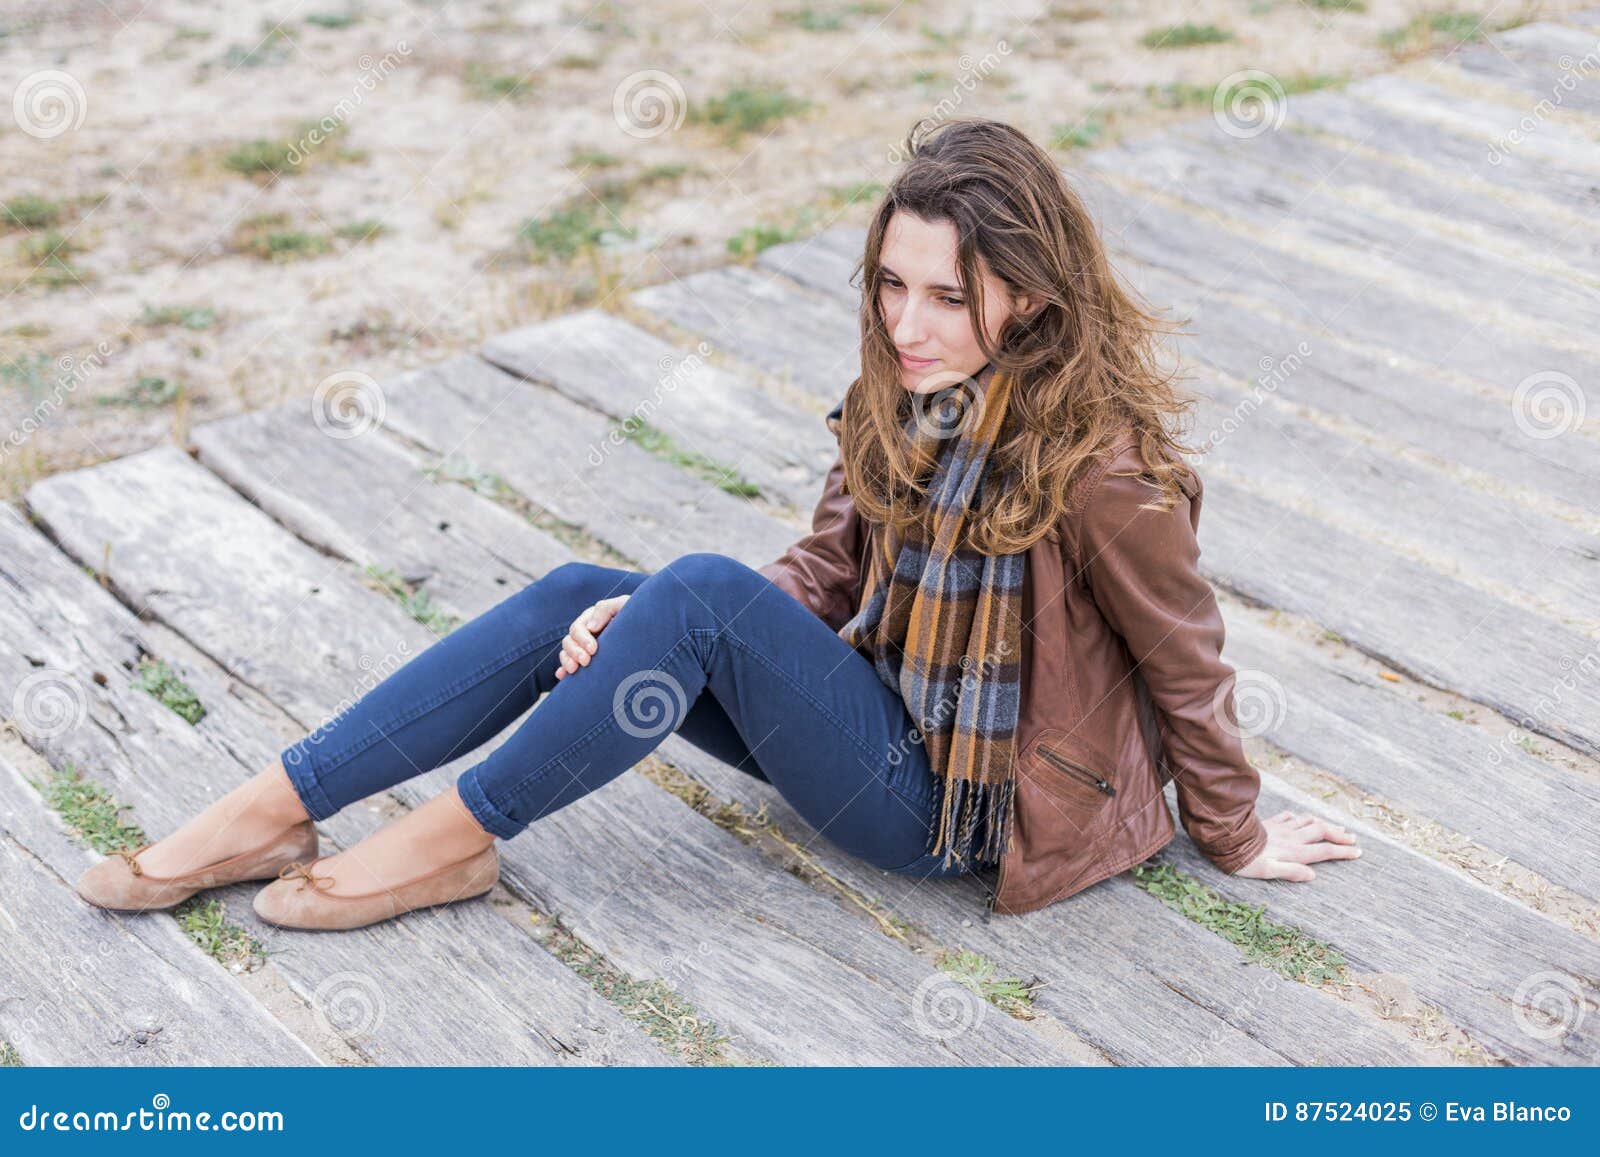 casual outdoors portrait of a beautiful young woman